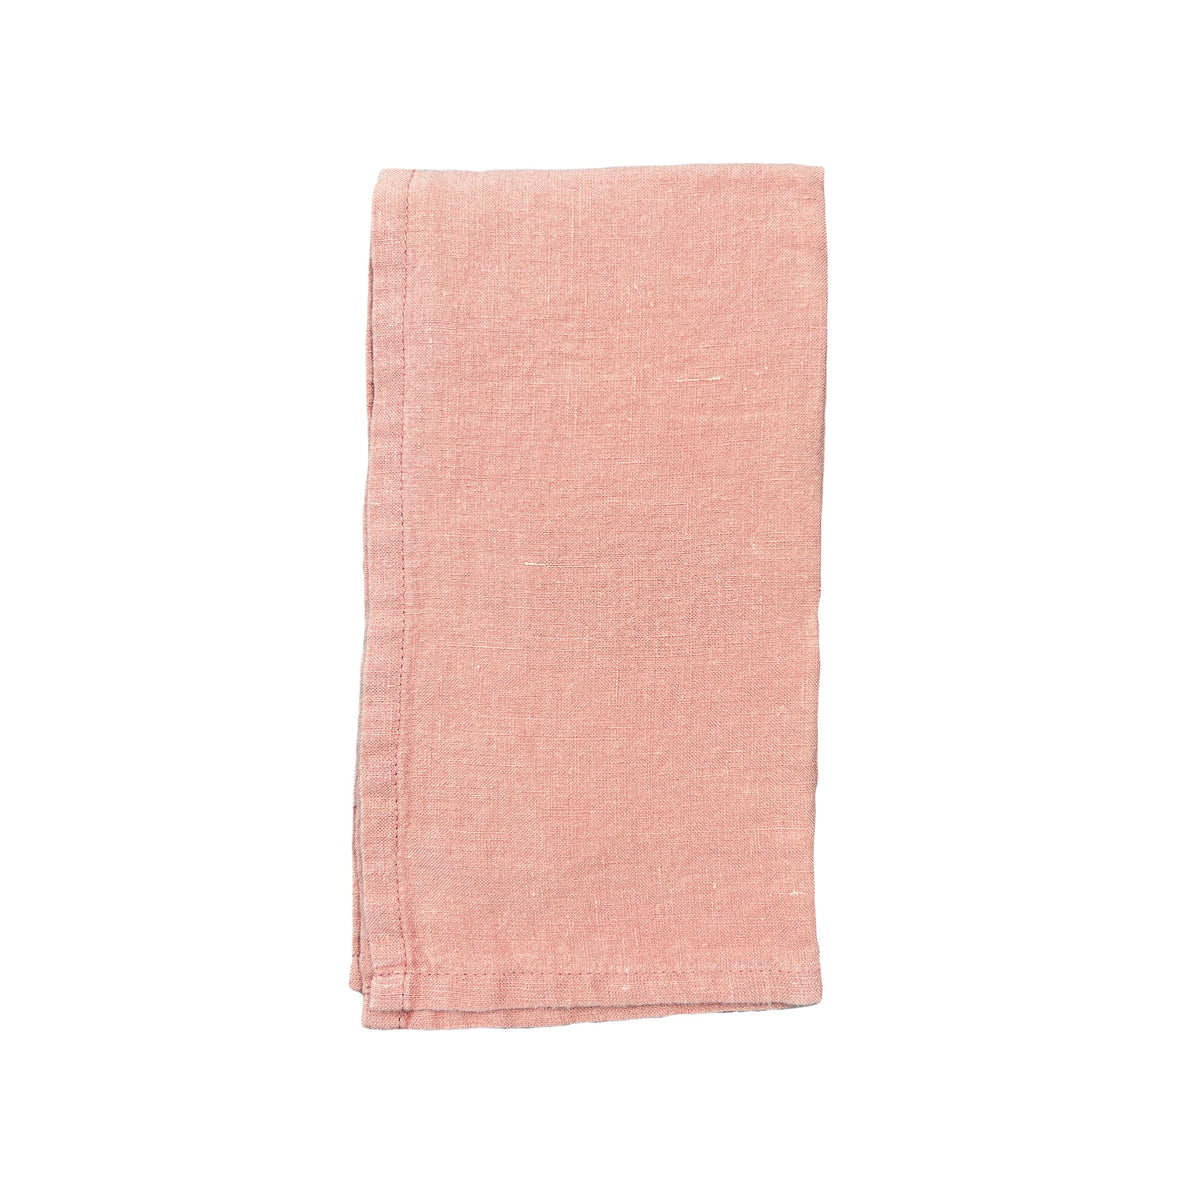 Stone Washed Linen Napkin in Clay- Set of 4